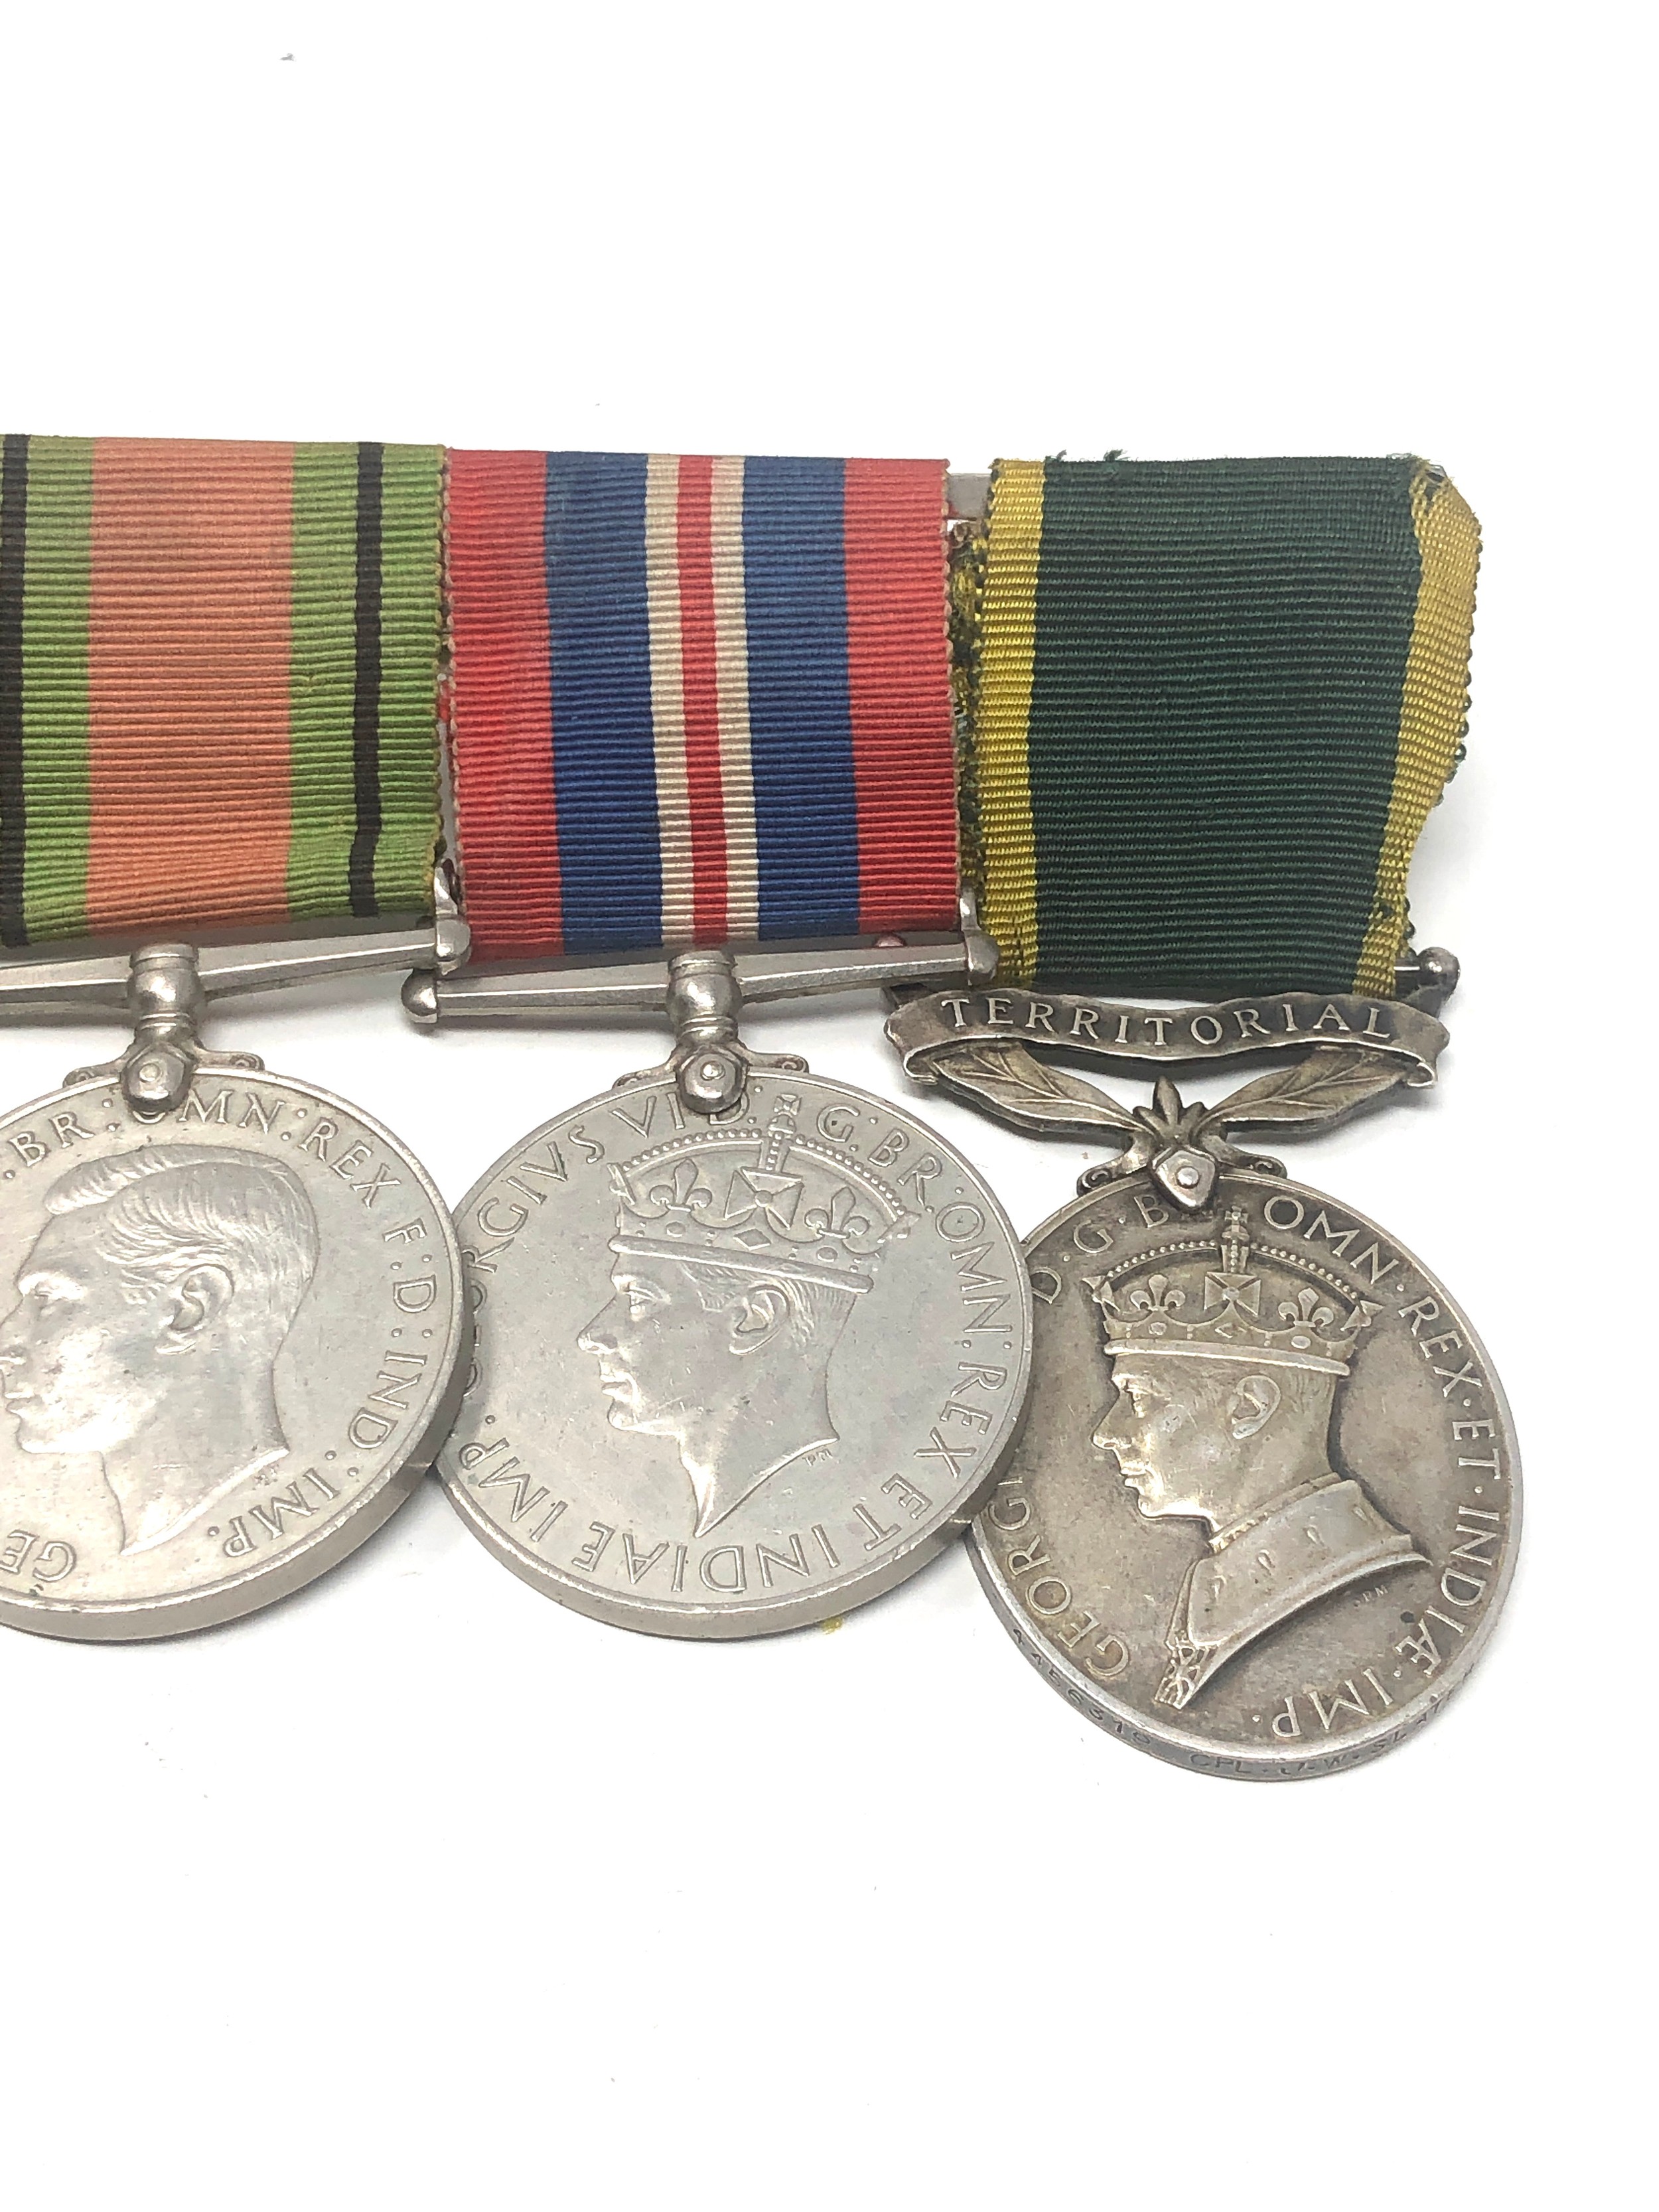 ww2 territorial mounted medal group inc africa star & 8th army clasp named to 4456319 cpl j.w slater - Bild 2 aus 3